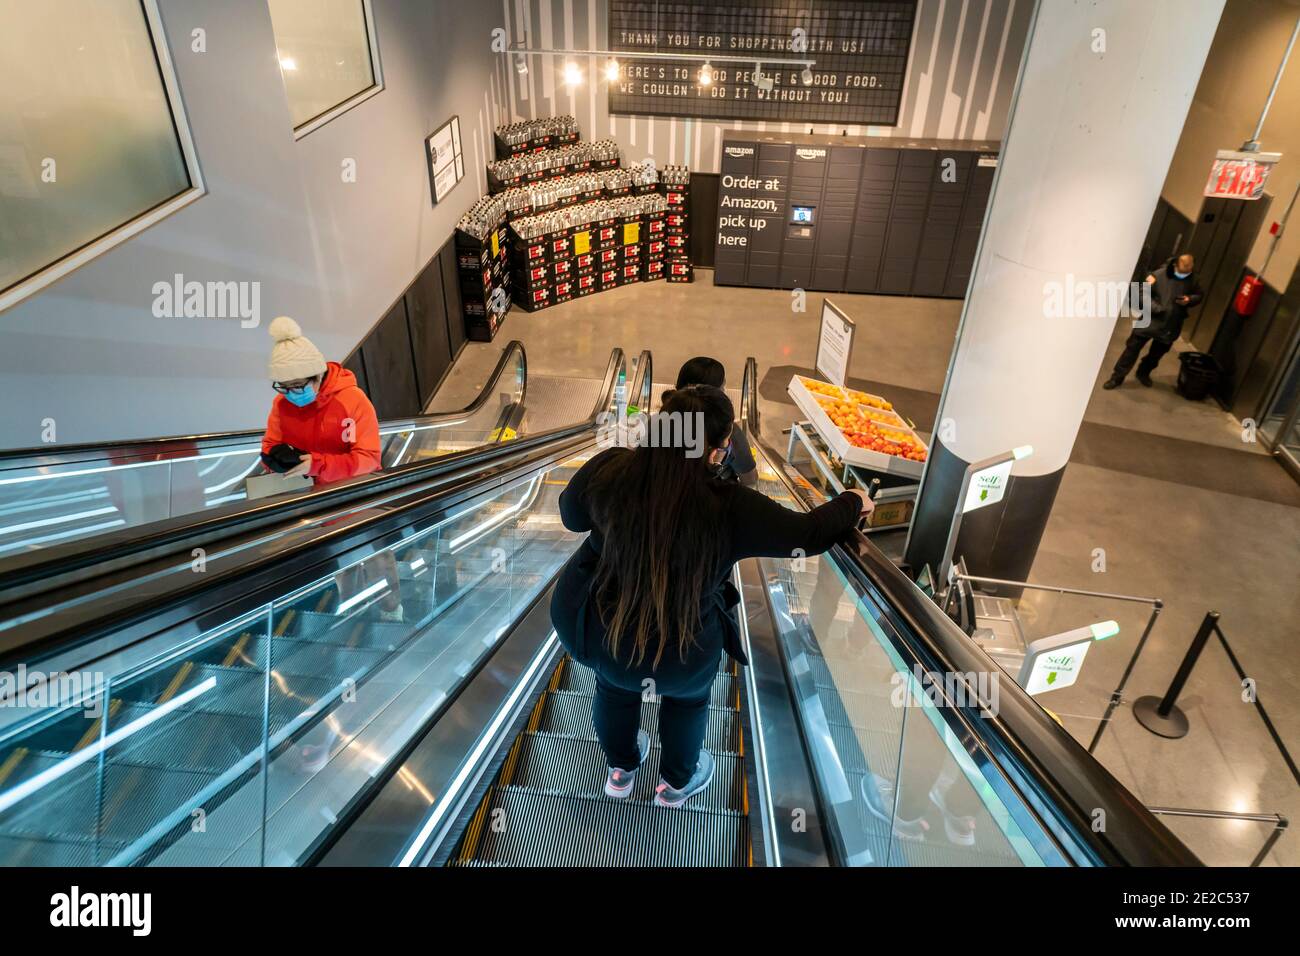 Customers exit and enter the Whole Foods Manhattan West in the Hudson Yards neighborhood of New York on Tuesday, January 12, 2021. (© Richard B. Levine) Stock Photo